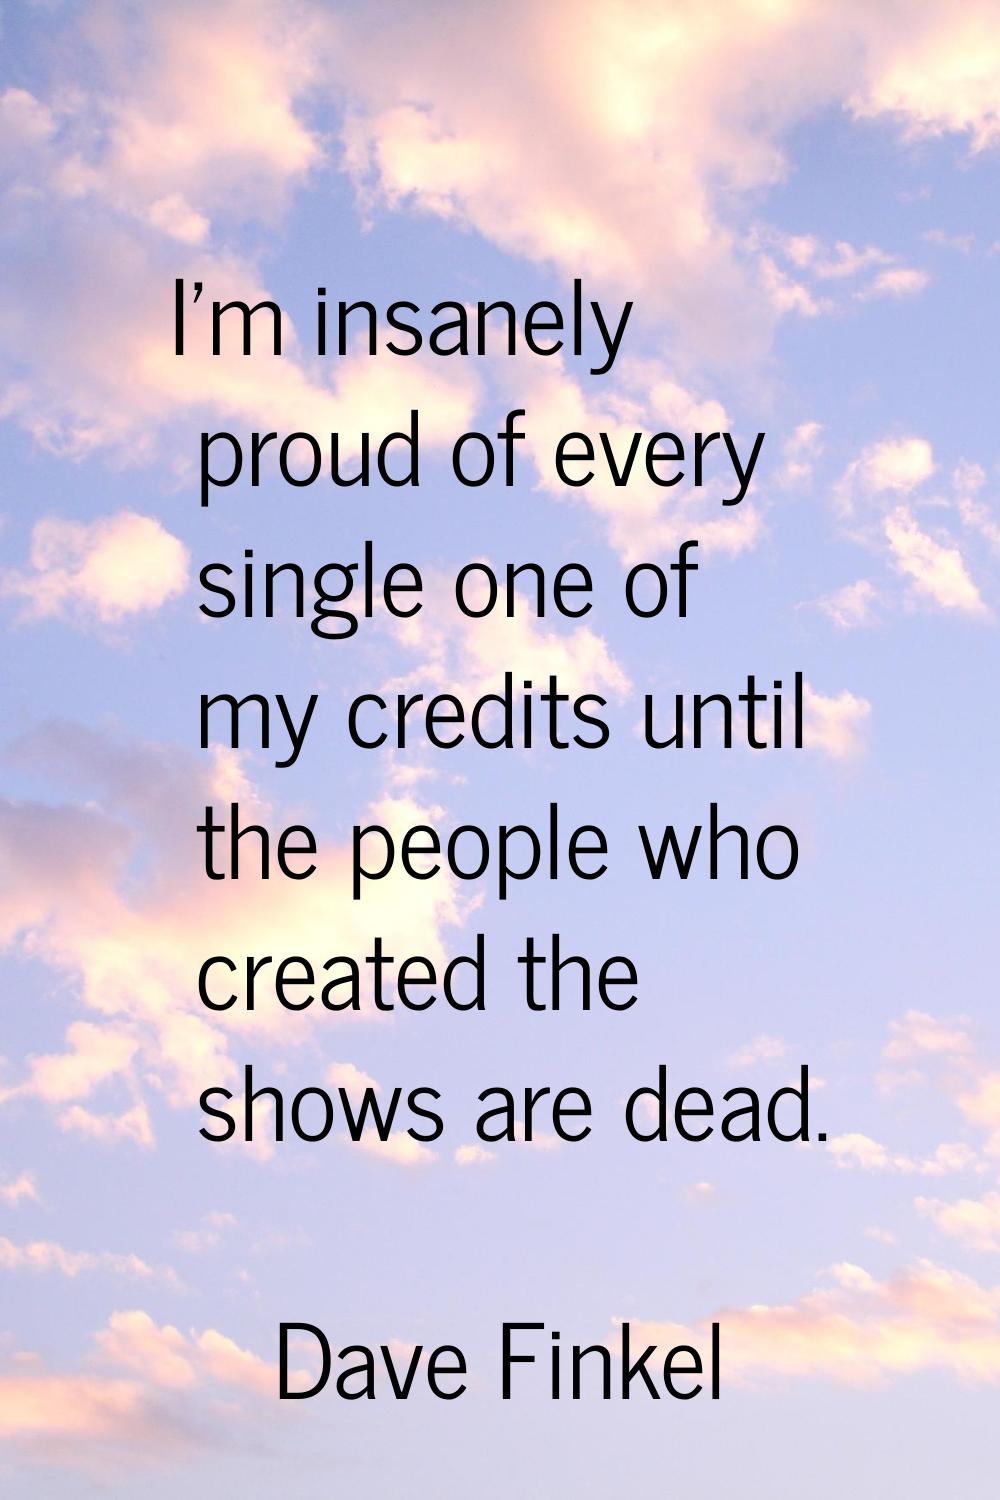 I'm insanely proud of every single one of my credits until the people who created the shows are dea